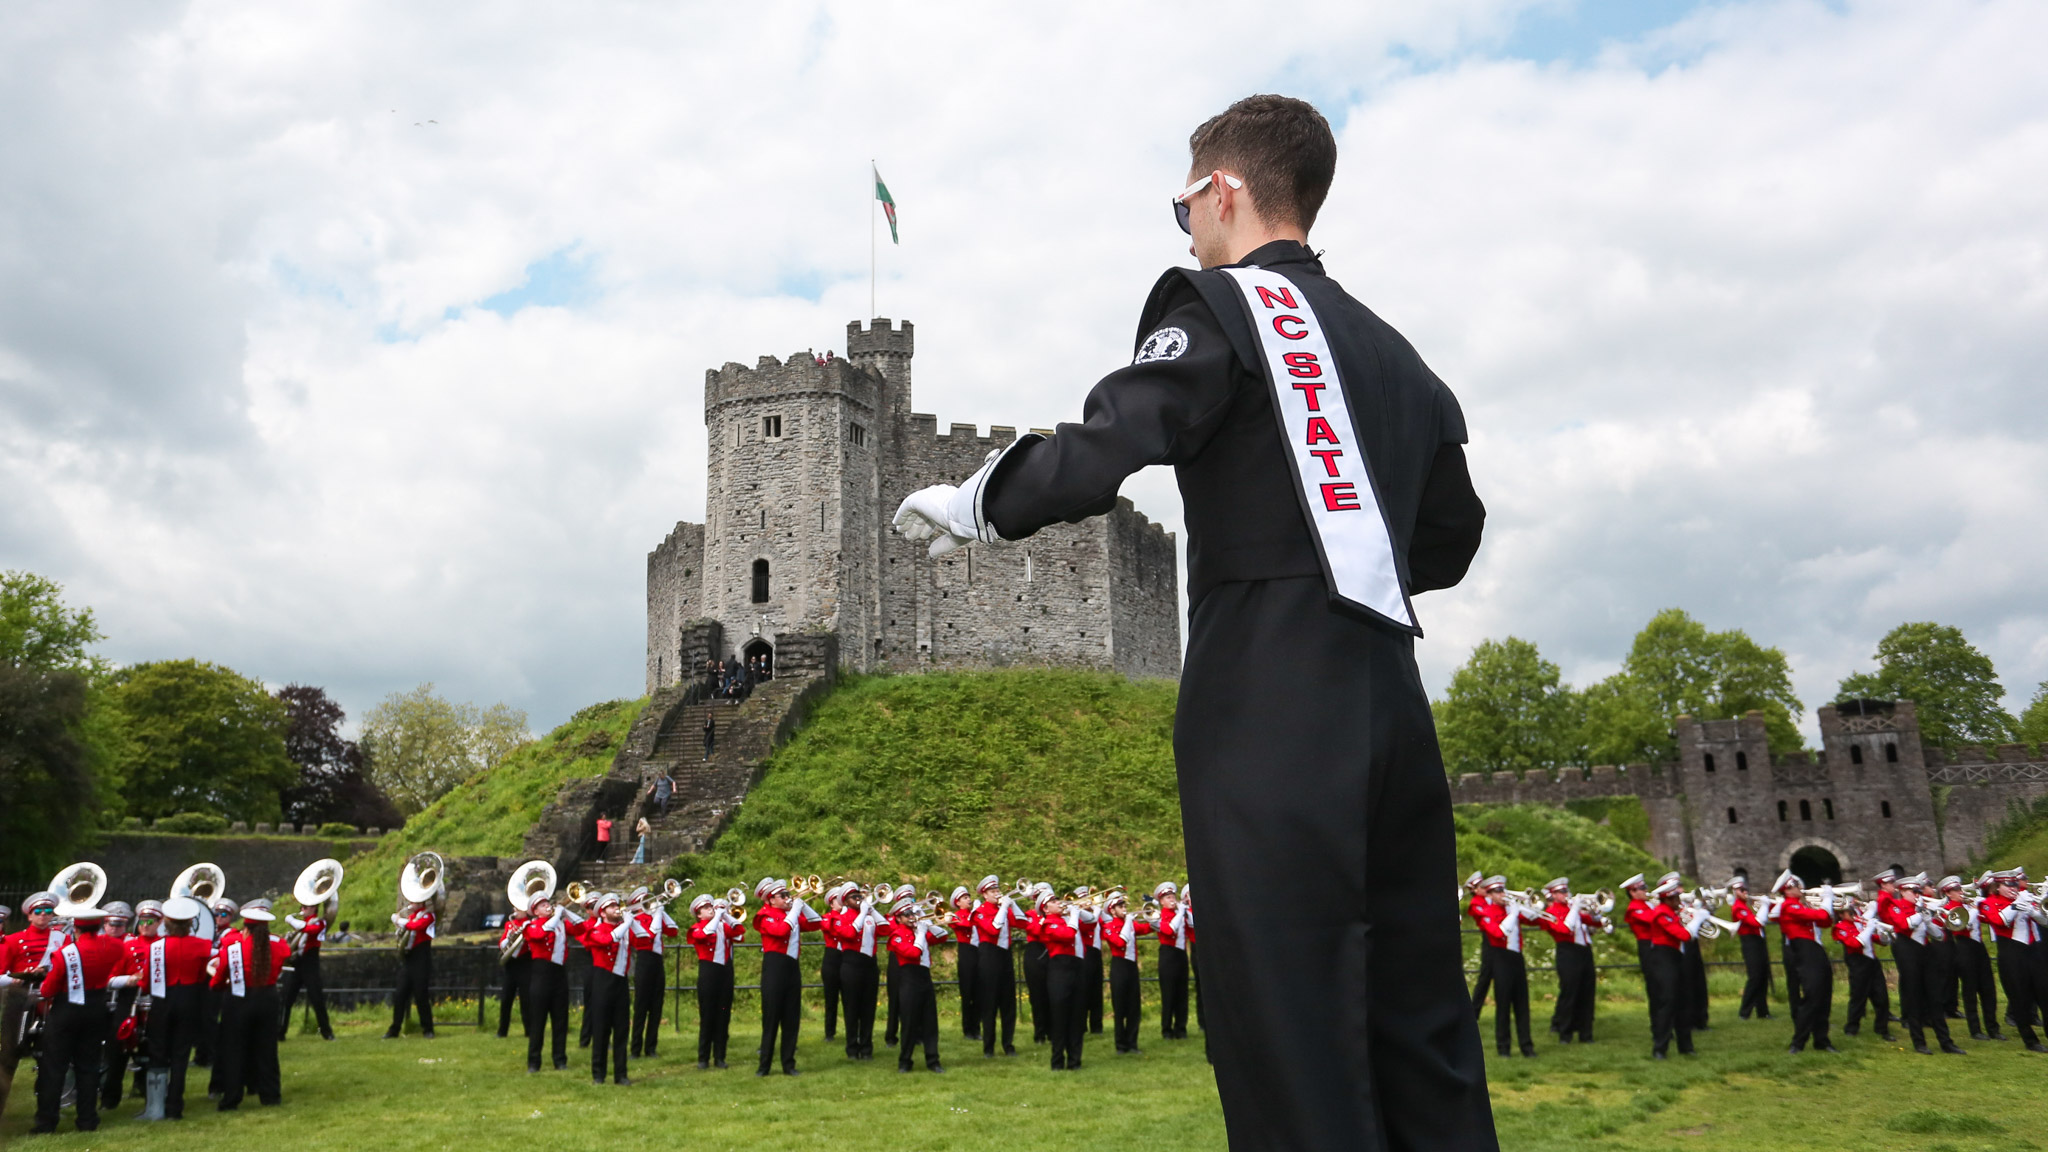 A student drum major leads their marching band section through a performance in front of a European castle.